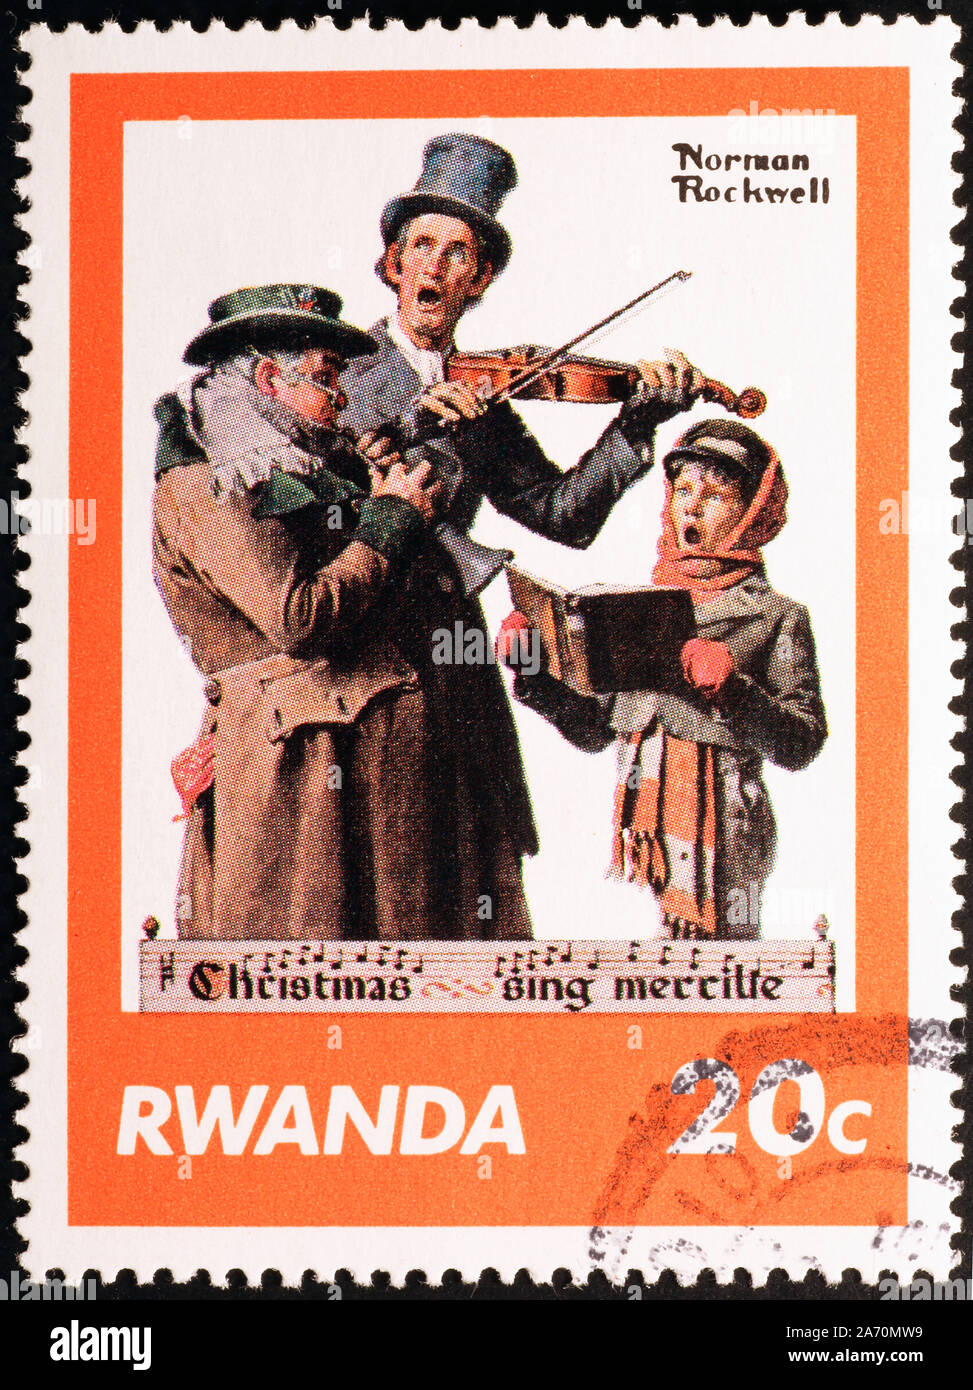 Christmas singers by Norman Rockwell on postage stamp Stock Photo